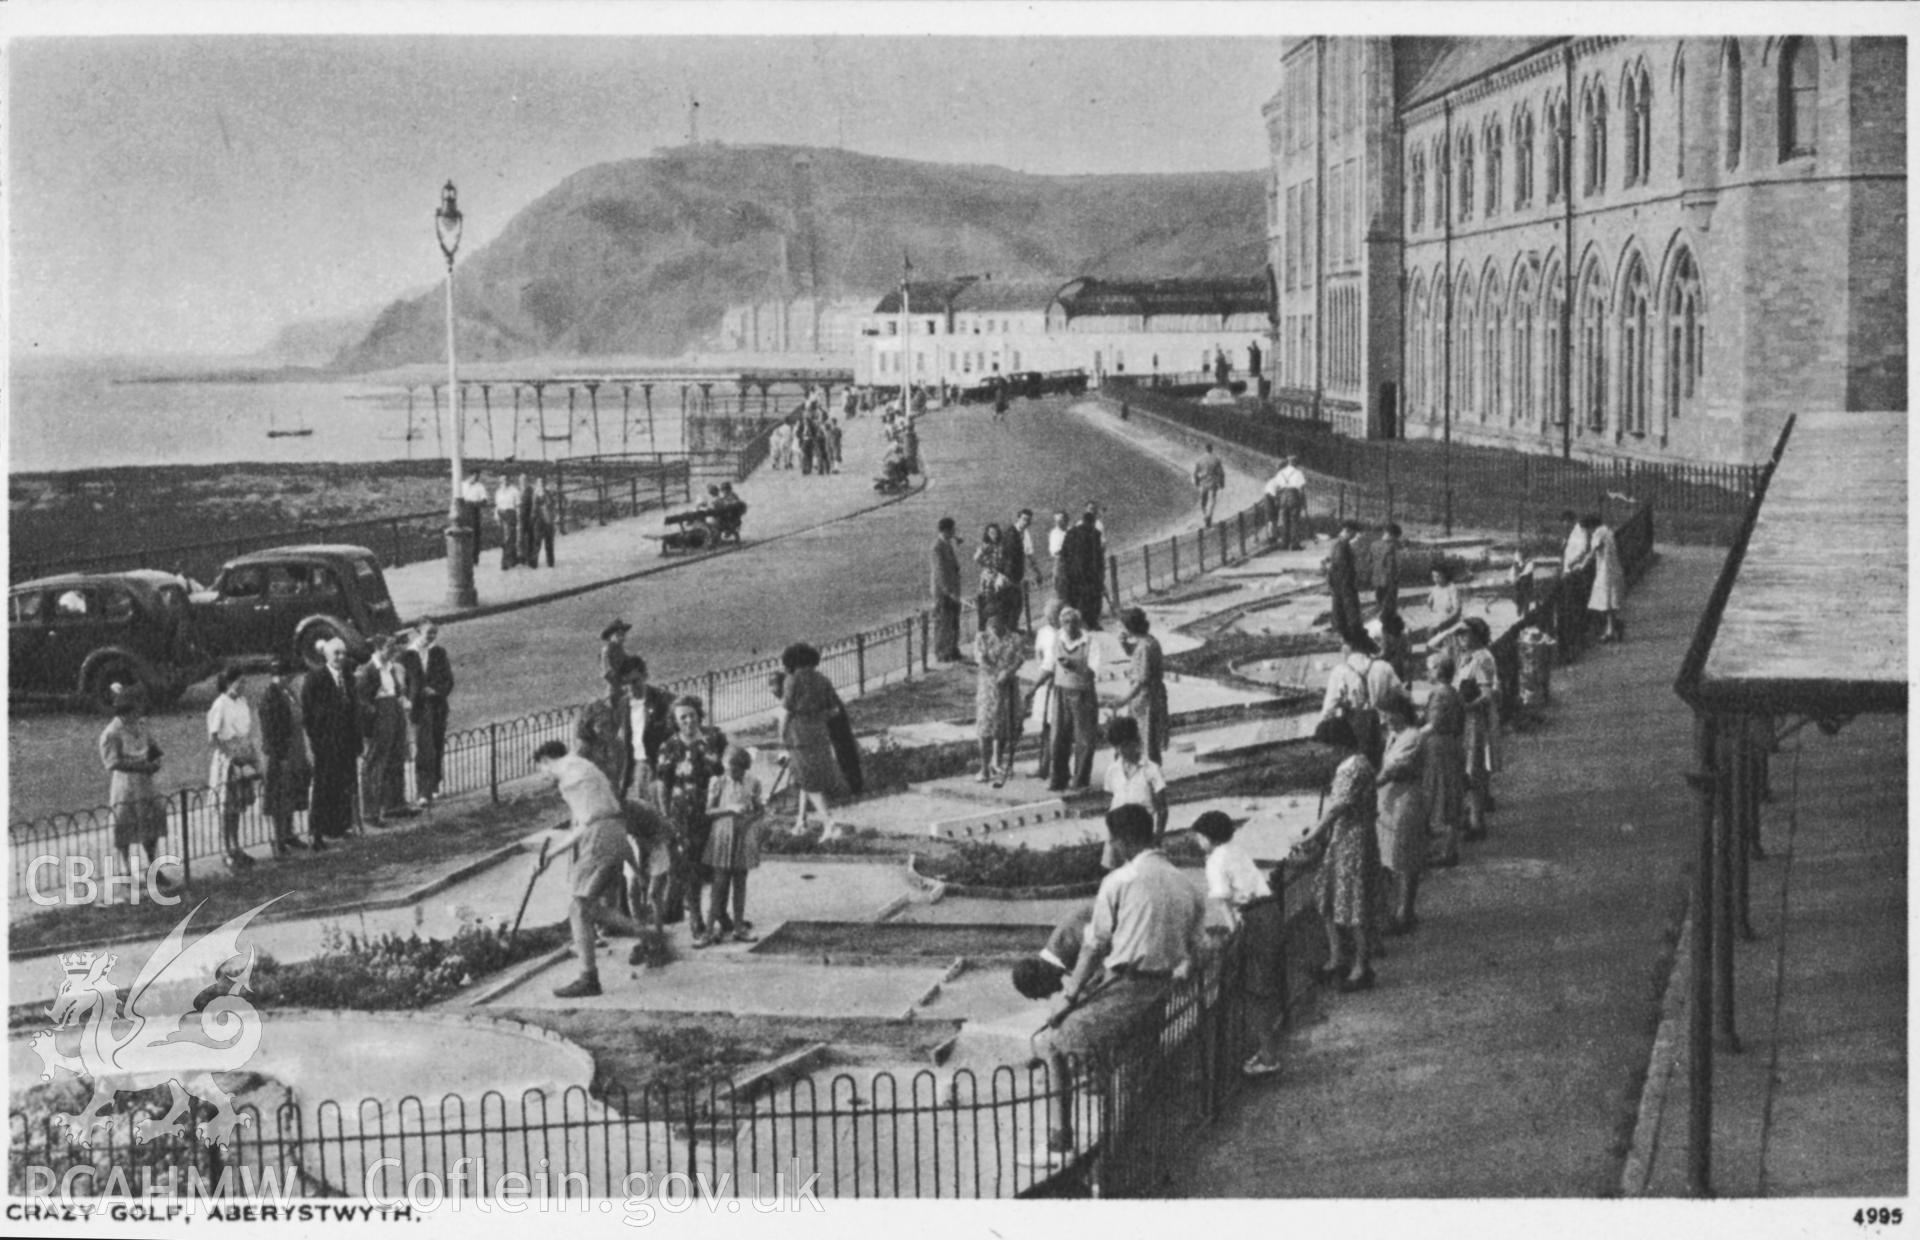 Digital copy of postcard showing Crazy Golf, Aberystwyth, c. 1950 (R A Postcards).  Loaned for copying by Charlie Downes